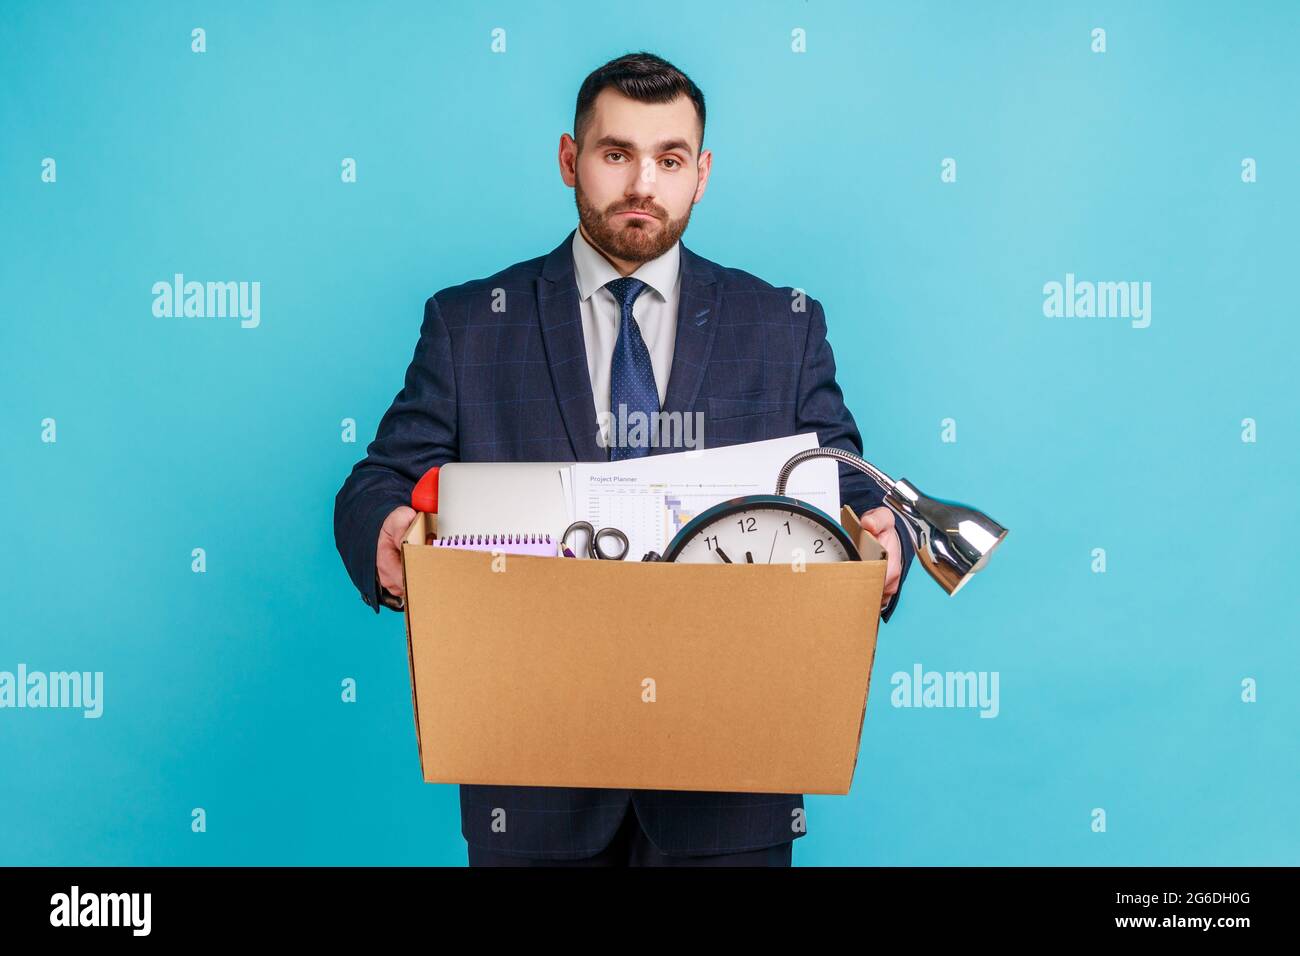 Portrait of sad depressed man employee in suit standing and holding in hands things in cardboard box, feeling sadness, dismissed from job. Indoor stud Stock Photo